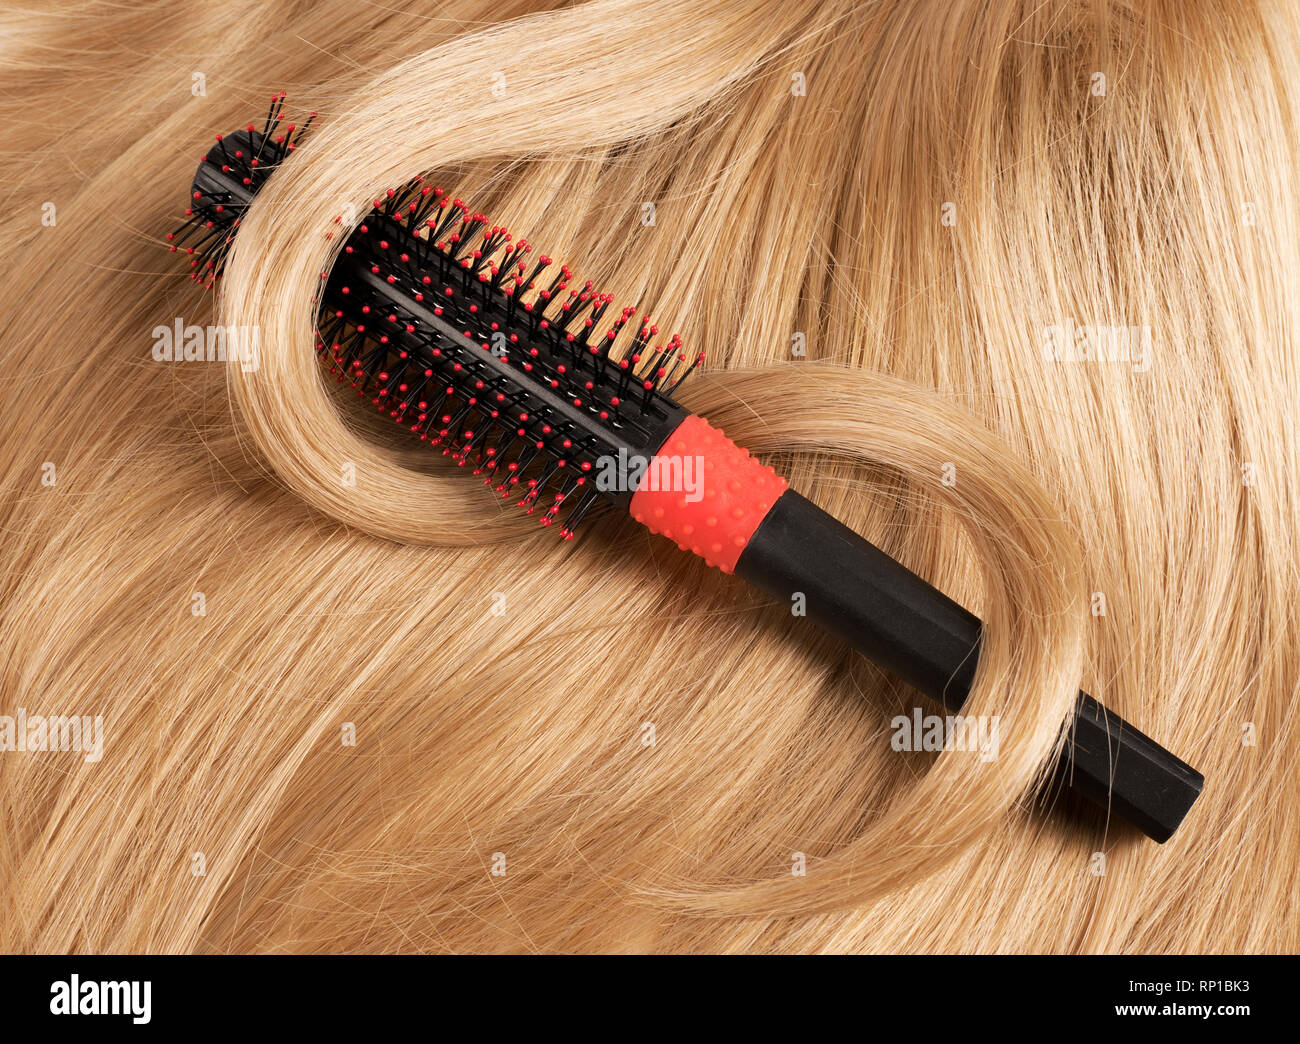 Wavy blonde human hair background with a comb Stock Photo